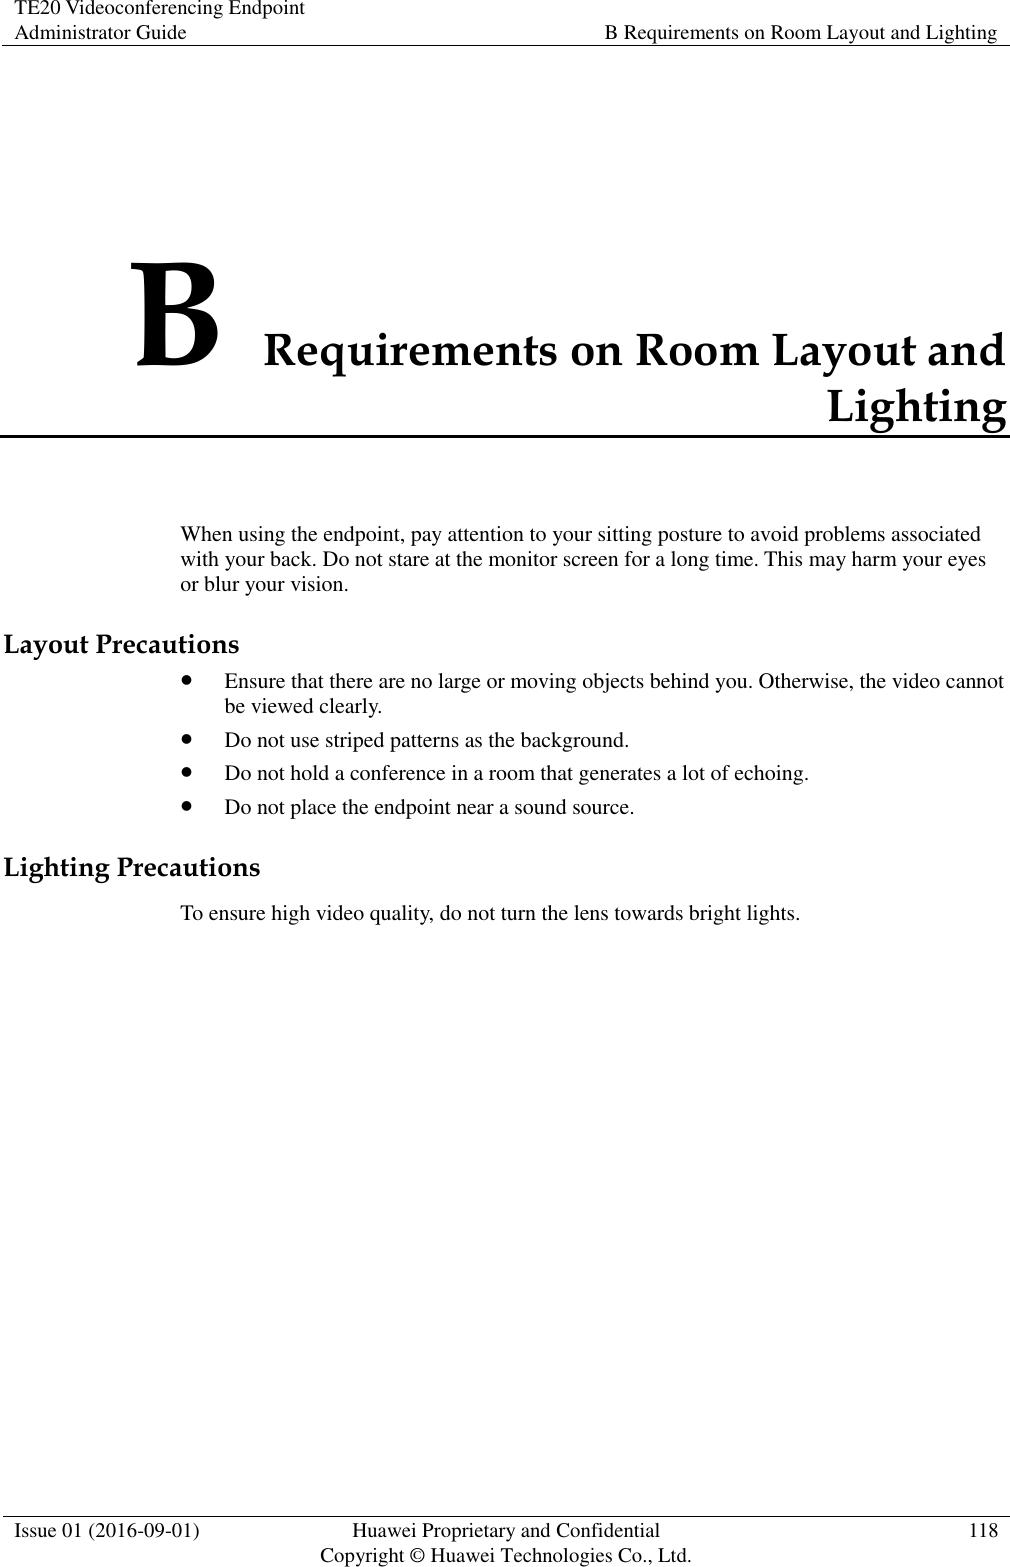 TE20 Videoconferencing Endpoint Administrator Guide B Requirements on Room Layout and Lighting  Issue 01 (2016-09-01) Huawei Proprietary and Confidential                                     Copyright © Huawei Technologies Co., Ltd. 118  B Requirements on Room Layout and Lighting When using the endpoint, pay attention to your sitting posture to avoid problems associated with your back. Do not stare at the monitor screen for a long time. This may harm your eyes or blur your vision. Layout Precautions  Ensure that there are no large or moving objects behind you. Otherwise, the video cannot be viewed clearly.  Do not use striped patterns as the background.  Do not hold a conference in a room that generates a lot of echoing.  Do not place the endpoint near a sound source. Lighting Precautions To ensure high video quality, do not turn the lens towards bright lights. 